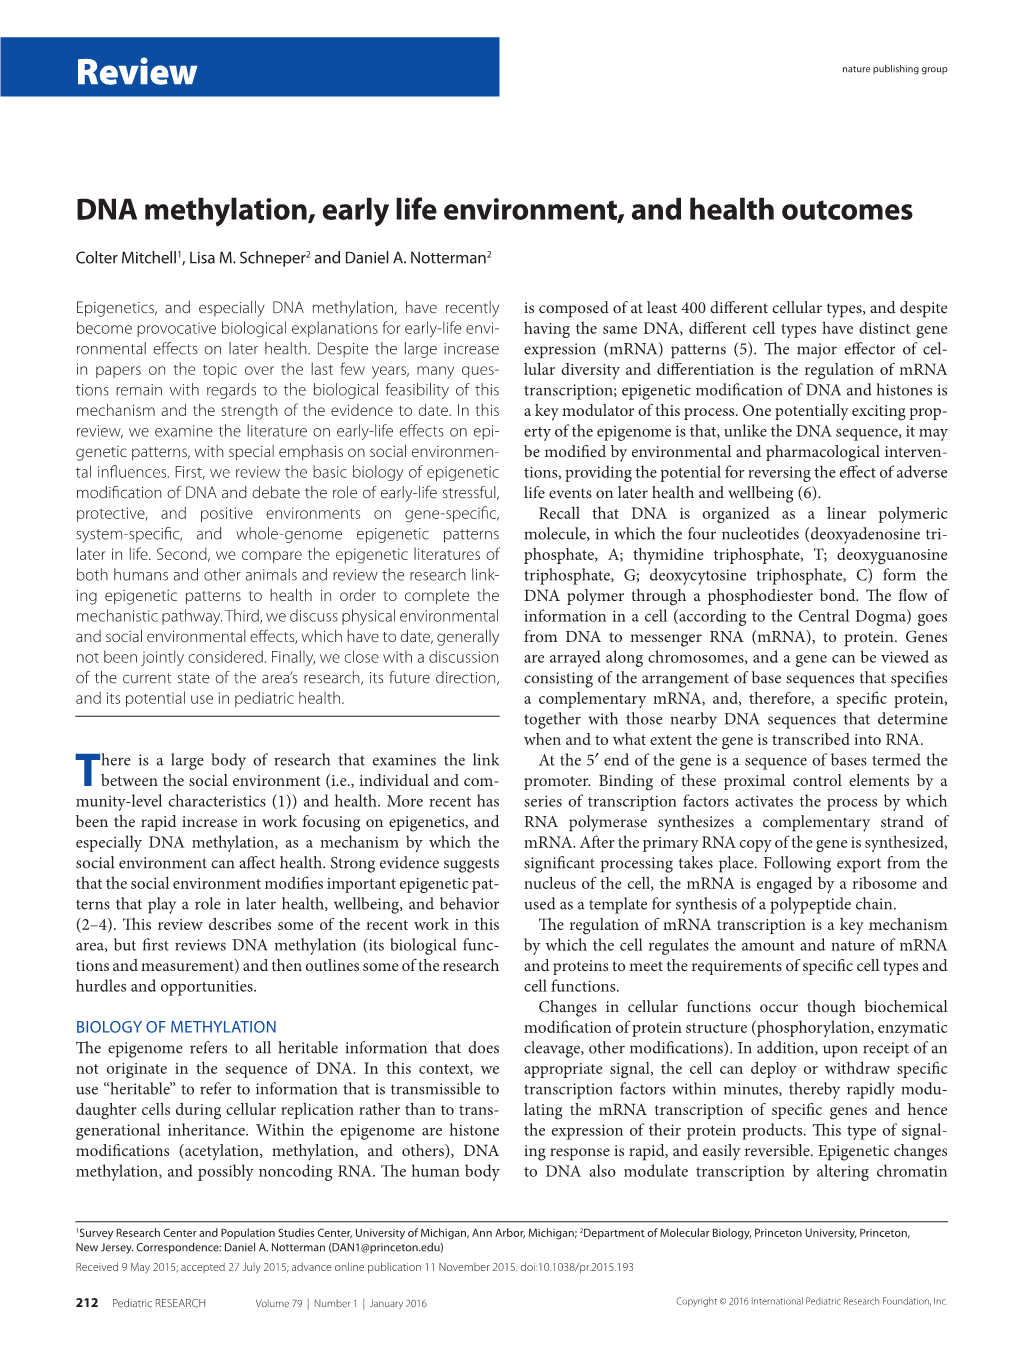 DNA Methylation, Early Life Environment, and Health Outcomes